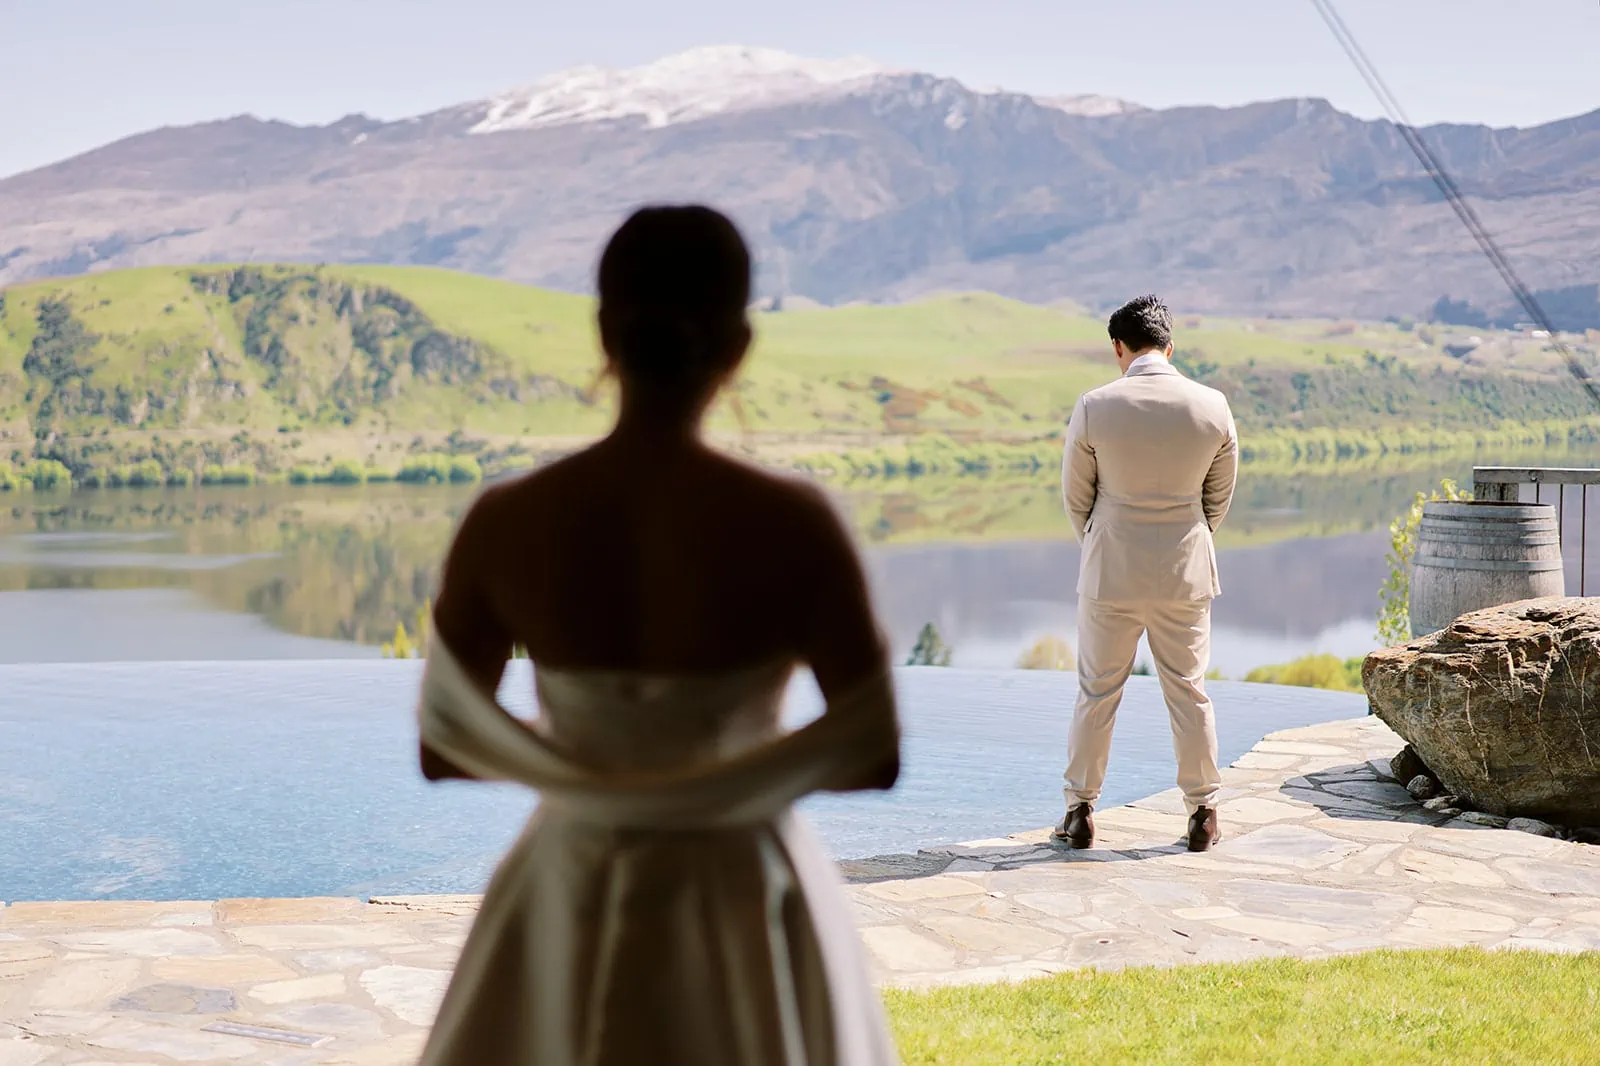 Queenstown Elopement Heli Wedding Photographer クイーンズタウン結婚式 | Ceidi and Tobi, a bride and groom, enjoy a scenic Queenstown wedding ceremony overlooking a serene lake with majestic mountains in the background.